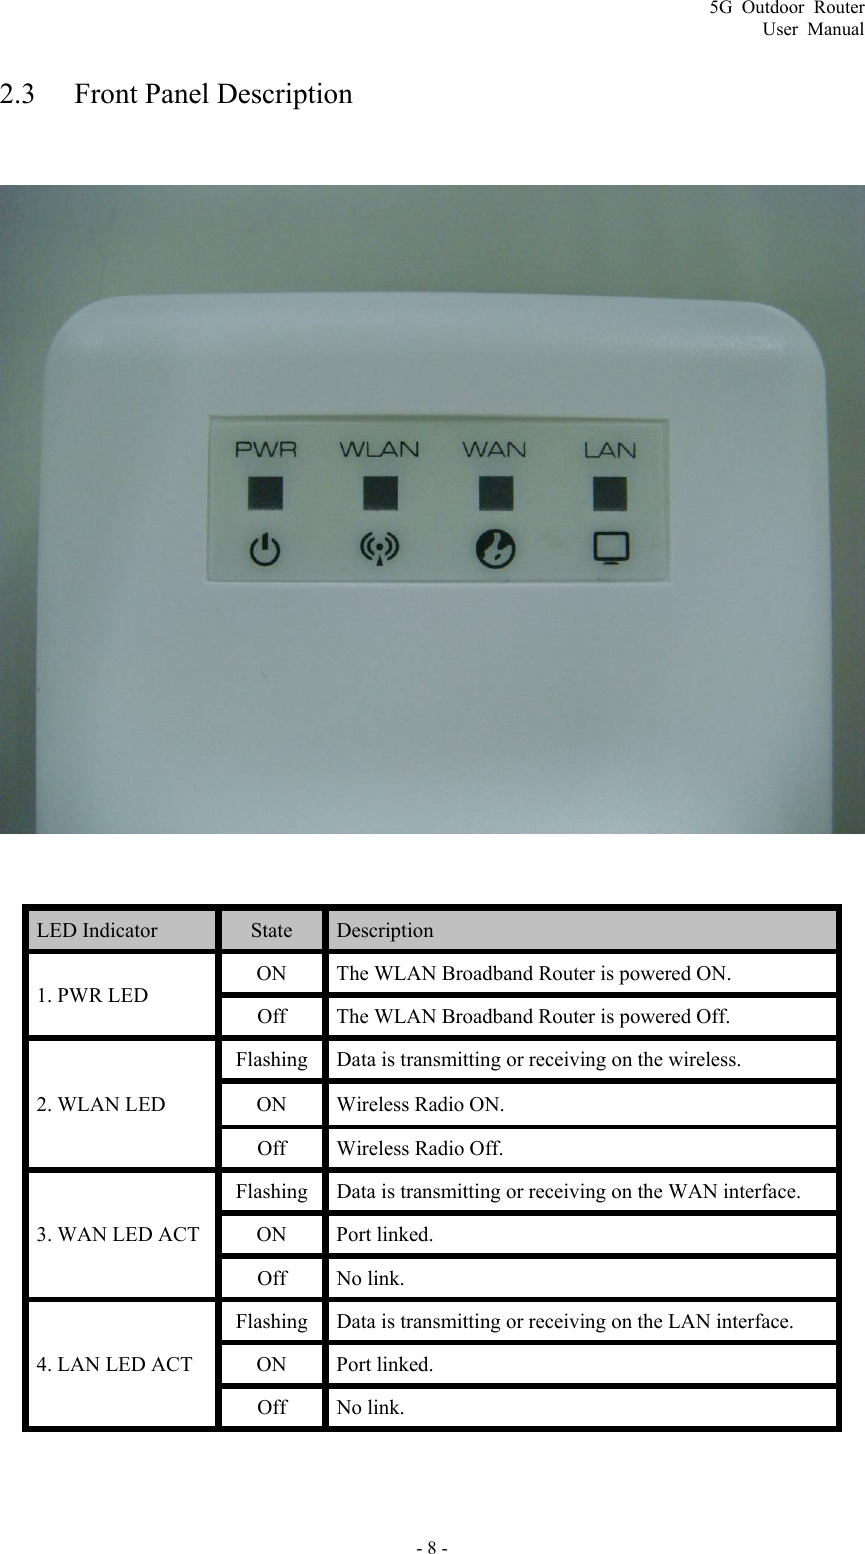 5G Outdoor Router User Manual - 8 - 2.3 Front Panel Description    LED Indicator    State   Description  1. PWR LED   ON  The WLAN Broadband Router is powered ON.   Off  The WLAN Broadband Router is powered Off.   2. WLAN LED   Flashing  Data is transmitting or receiving on the wireless.   ON  Wireless Radio ON.   Off  Wireless Radio Off. 3. WAN LED ACT   Flashing  Data is transmitting or receiving on the WAN interface.   ON Port linked.  Off No link.  4. LAN LED ACT   Flashing  Data is transmitting or receiving on the LAN interface.   ON Port linked.  Off No link.  